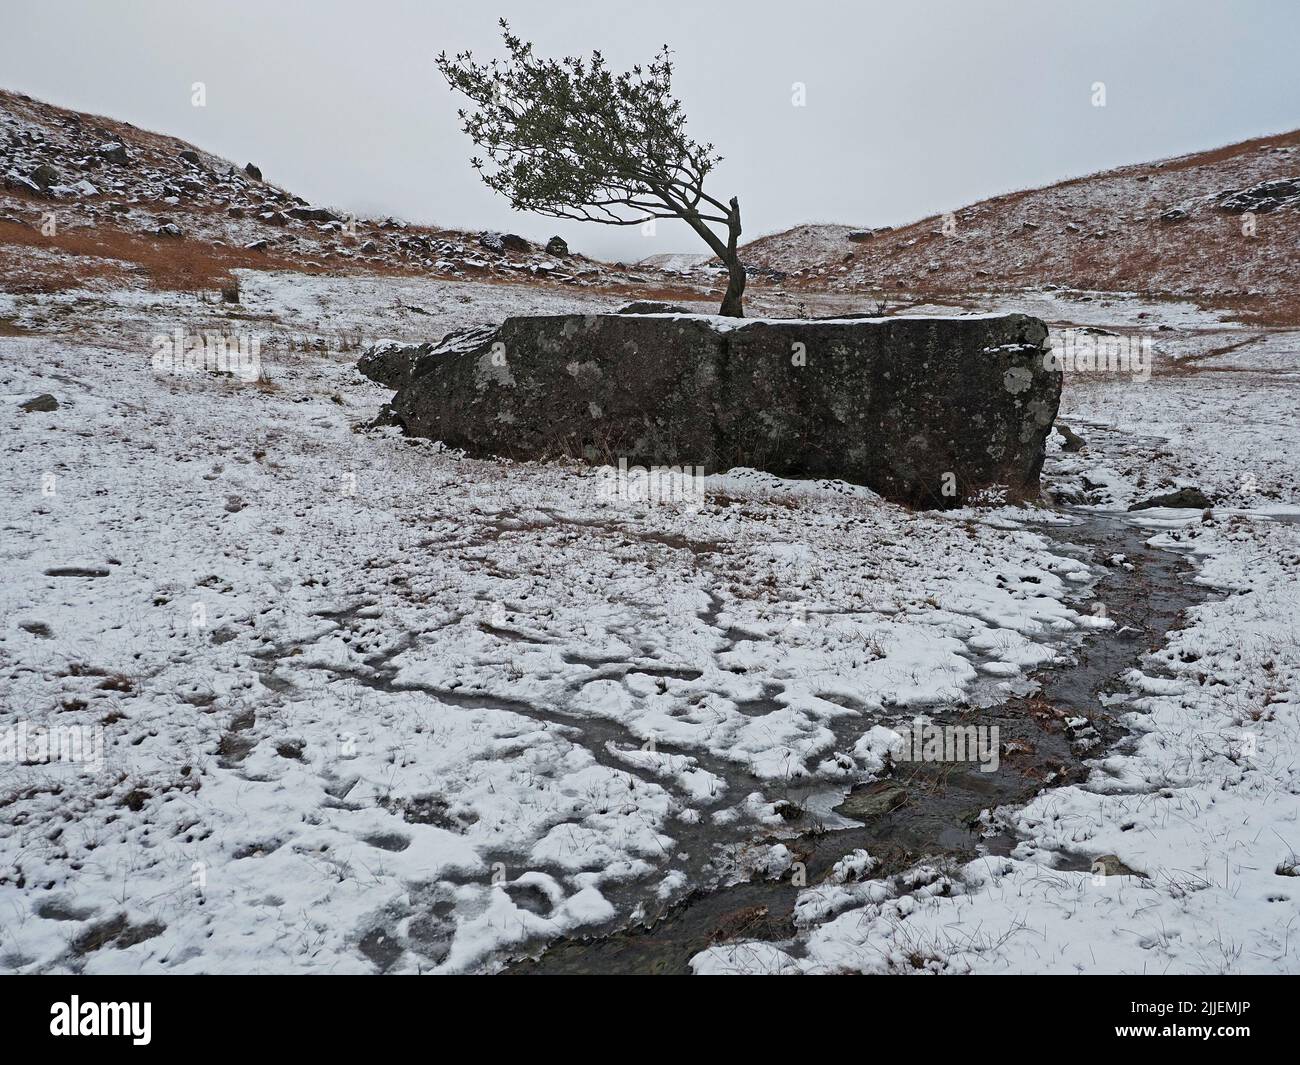 Wintry lone Holly tree (Ilex aquiifolium) growing in crevice in large boulder in snowy hills near Easedale Tarn above Grasmere,Cumbria,England, UK Stock Photo